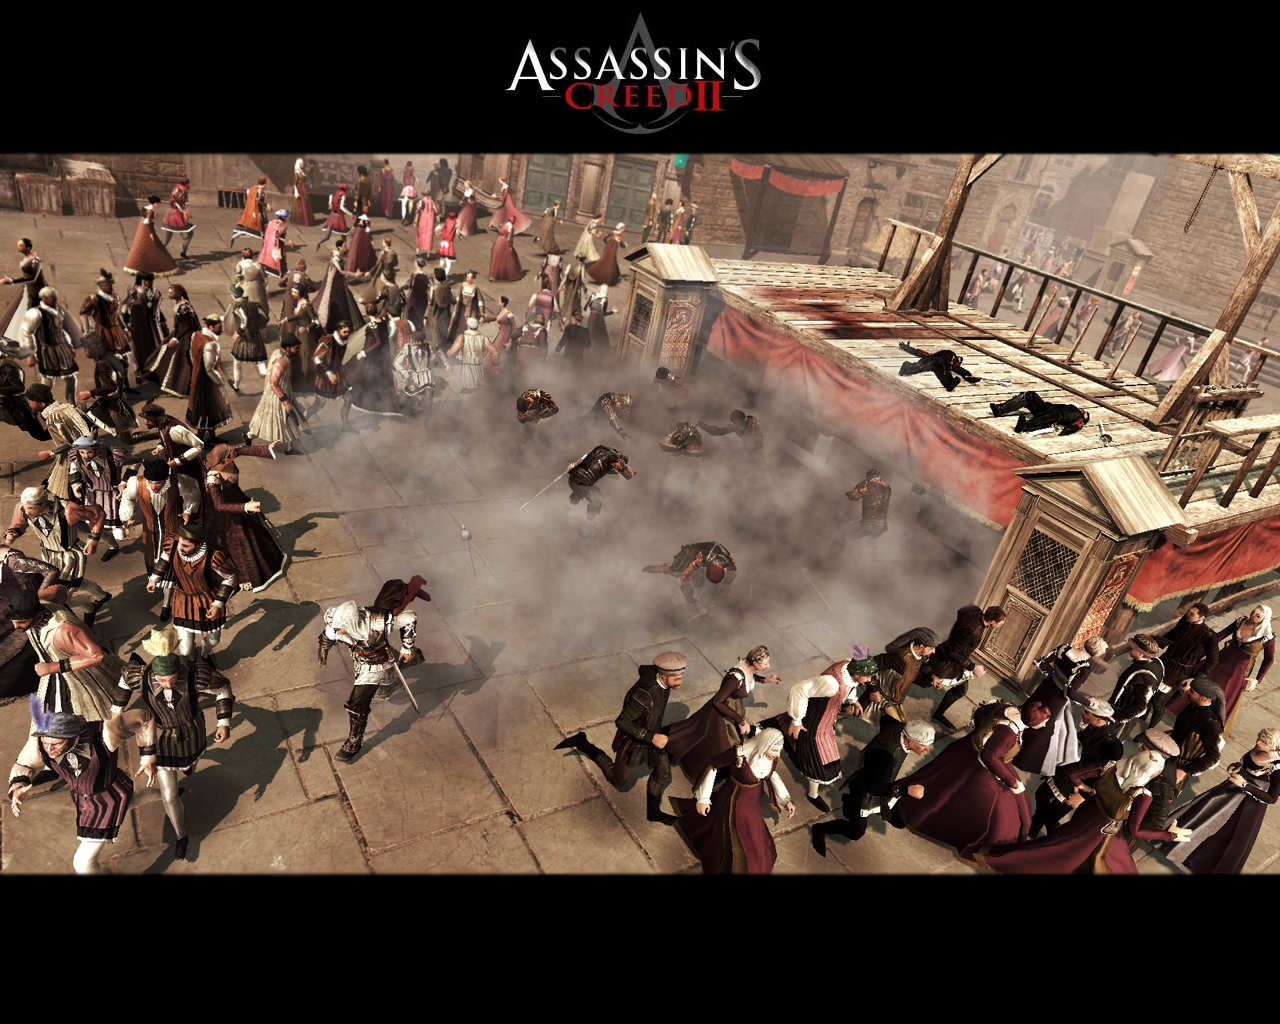 Assasın creed 2. Assassin s Creed II: Discovery. Assassin’s Creed 2 (2009). Ассасин Крид 2 Скриншоты. Assassin's Creed 2 Скриншоты.